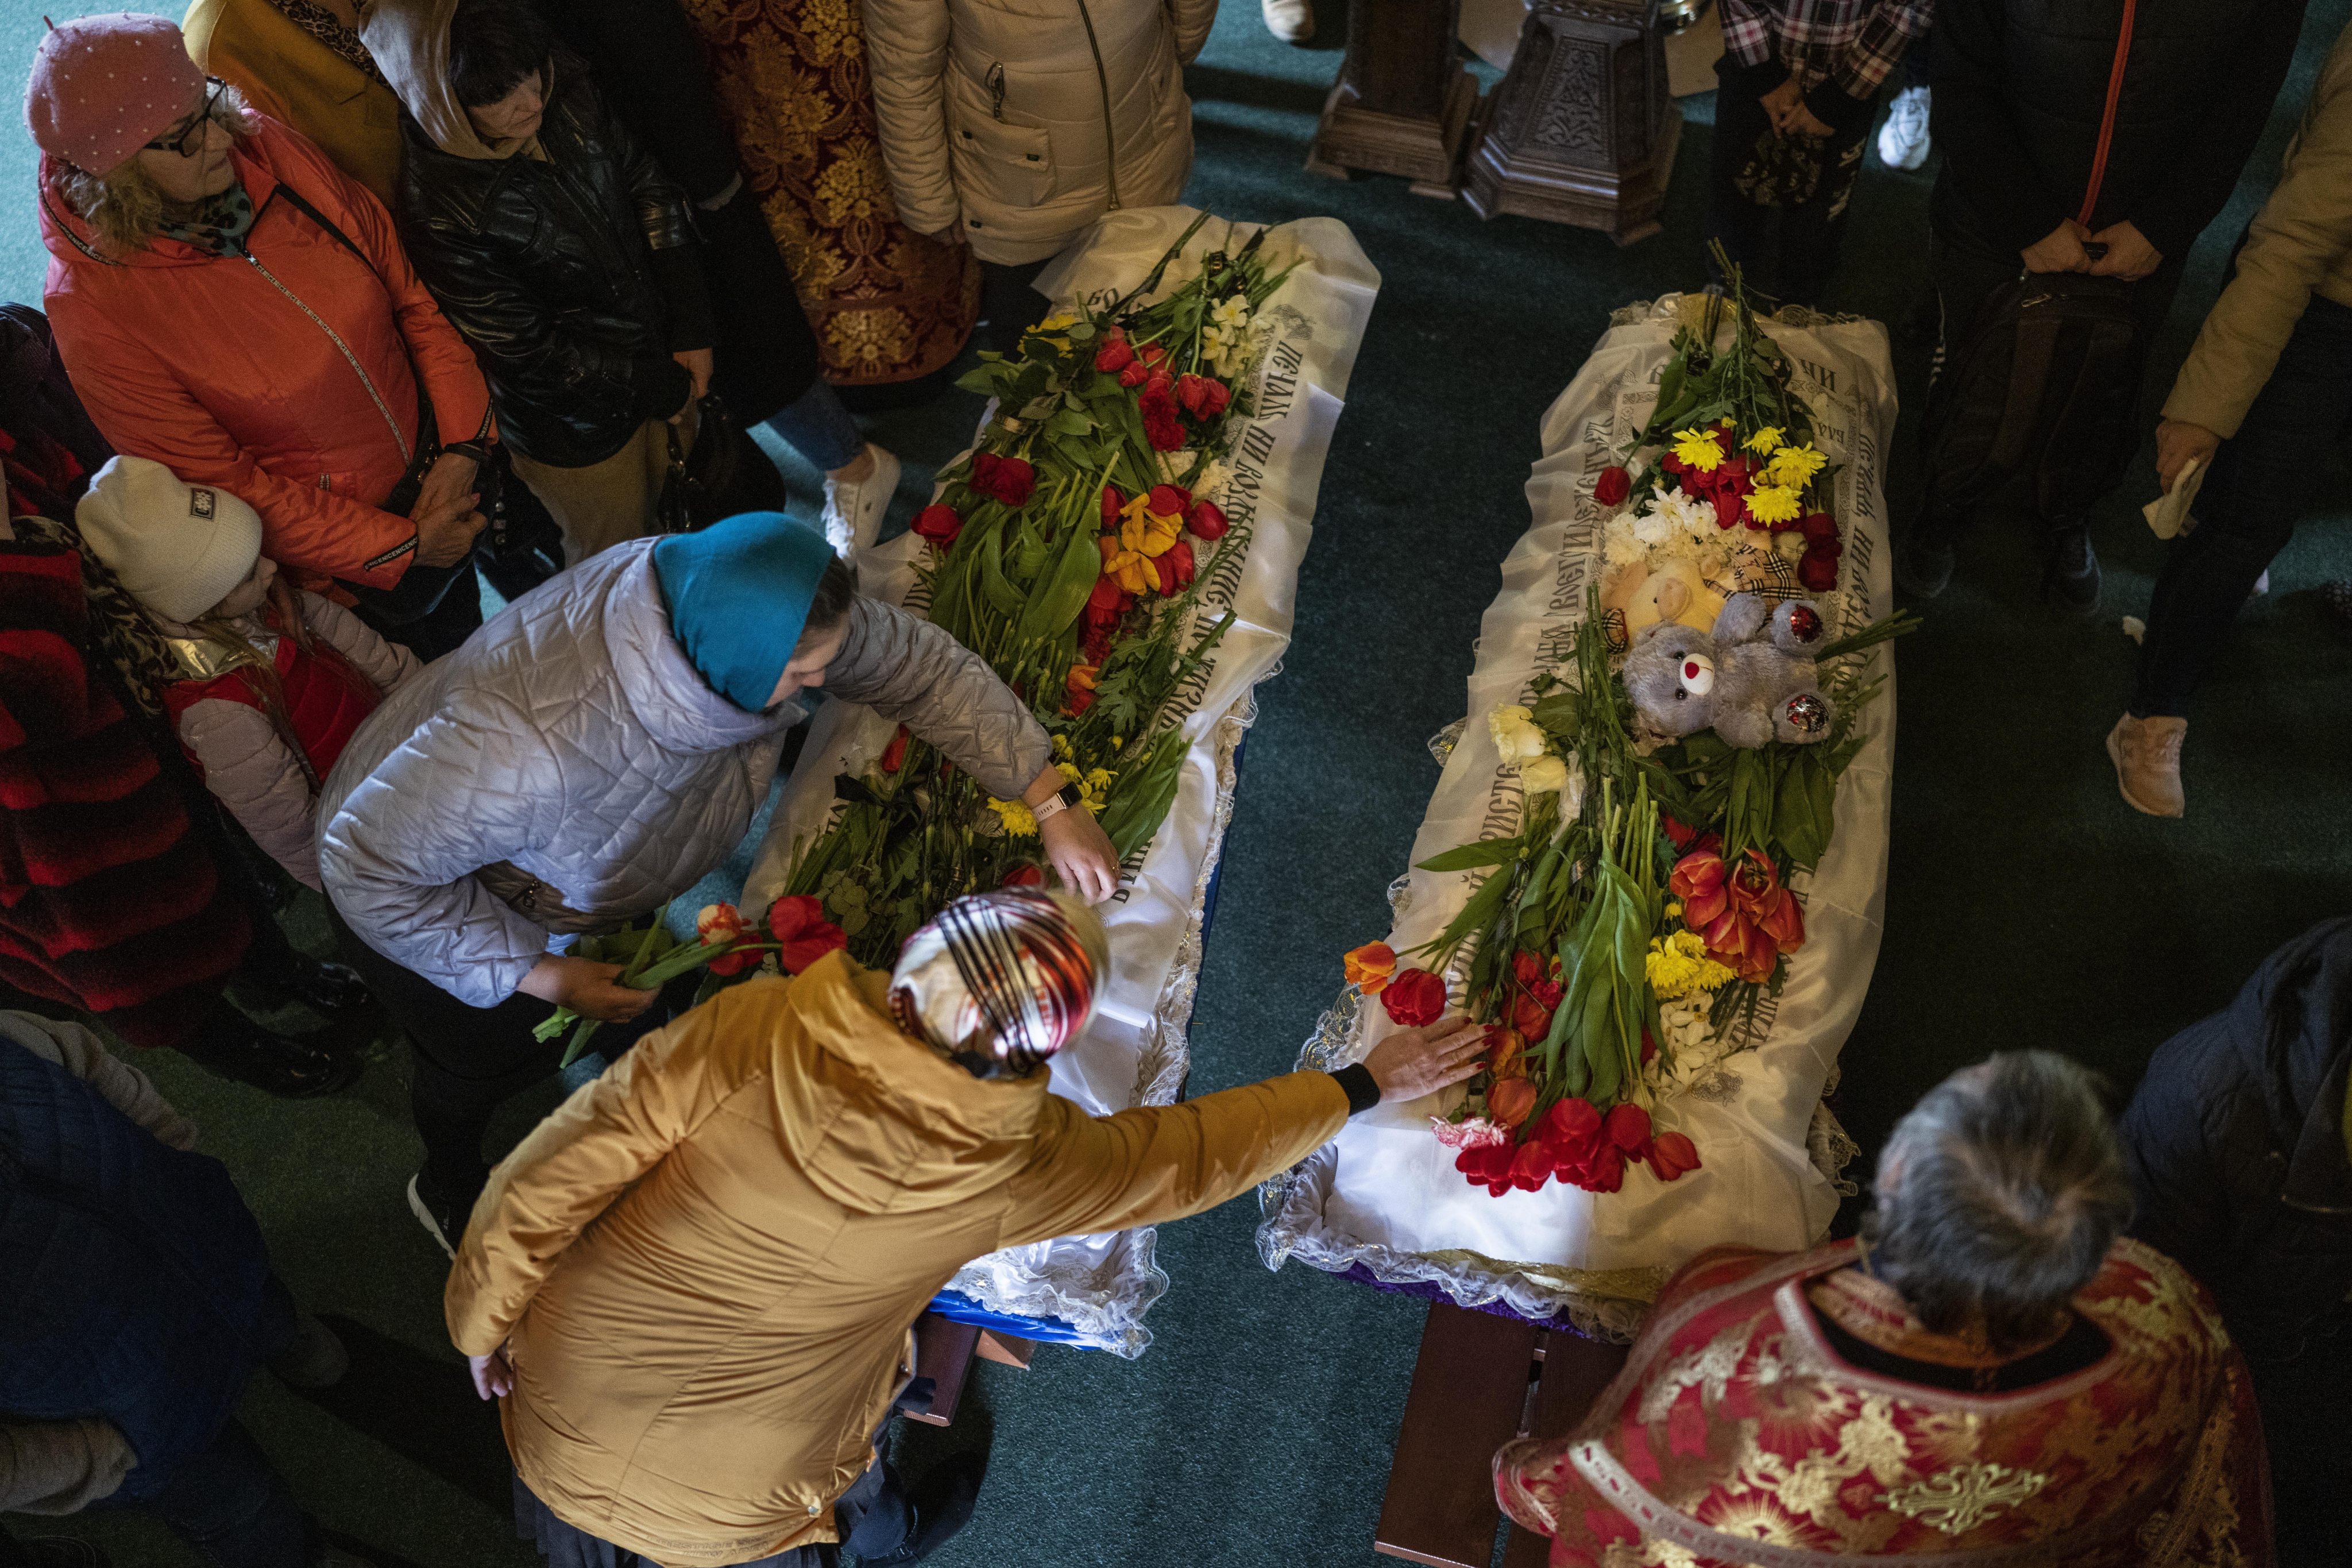 Mourners place flowers on the coffins of Sofia Shulha, 11, and Pysarev Kiriusha, 17, who were killed during a Russian attack. Photo: AP